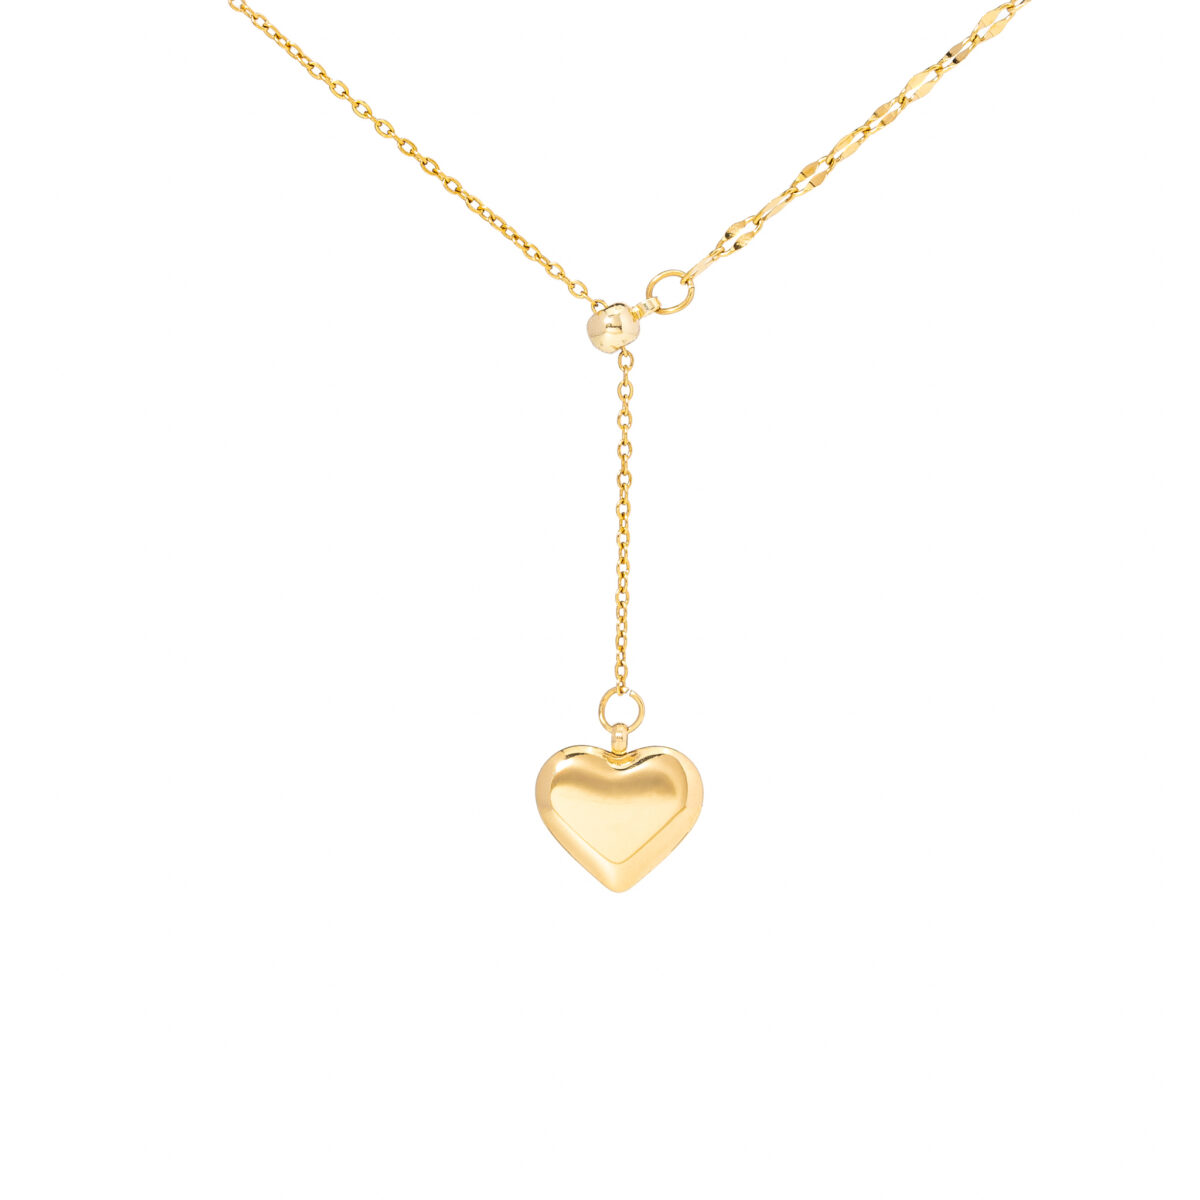 https://m.clubbella.co/product/pave-heart-charm-necklace/ Pave Heart Charm Necklace (2aa)